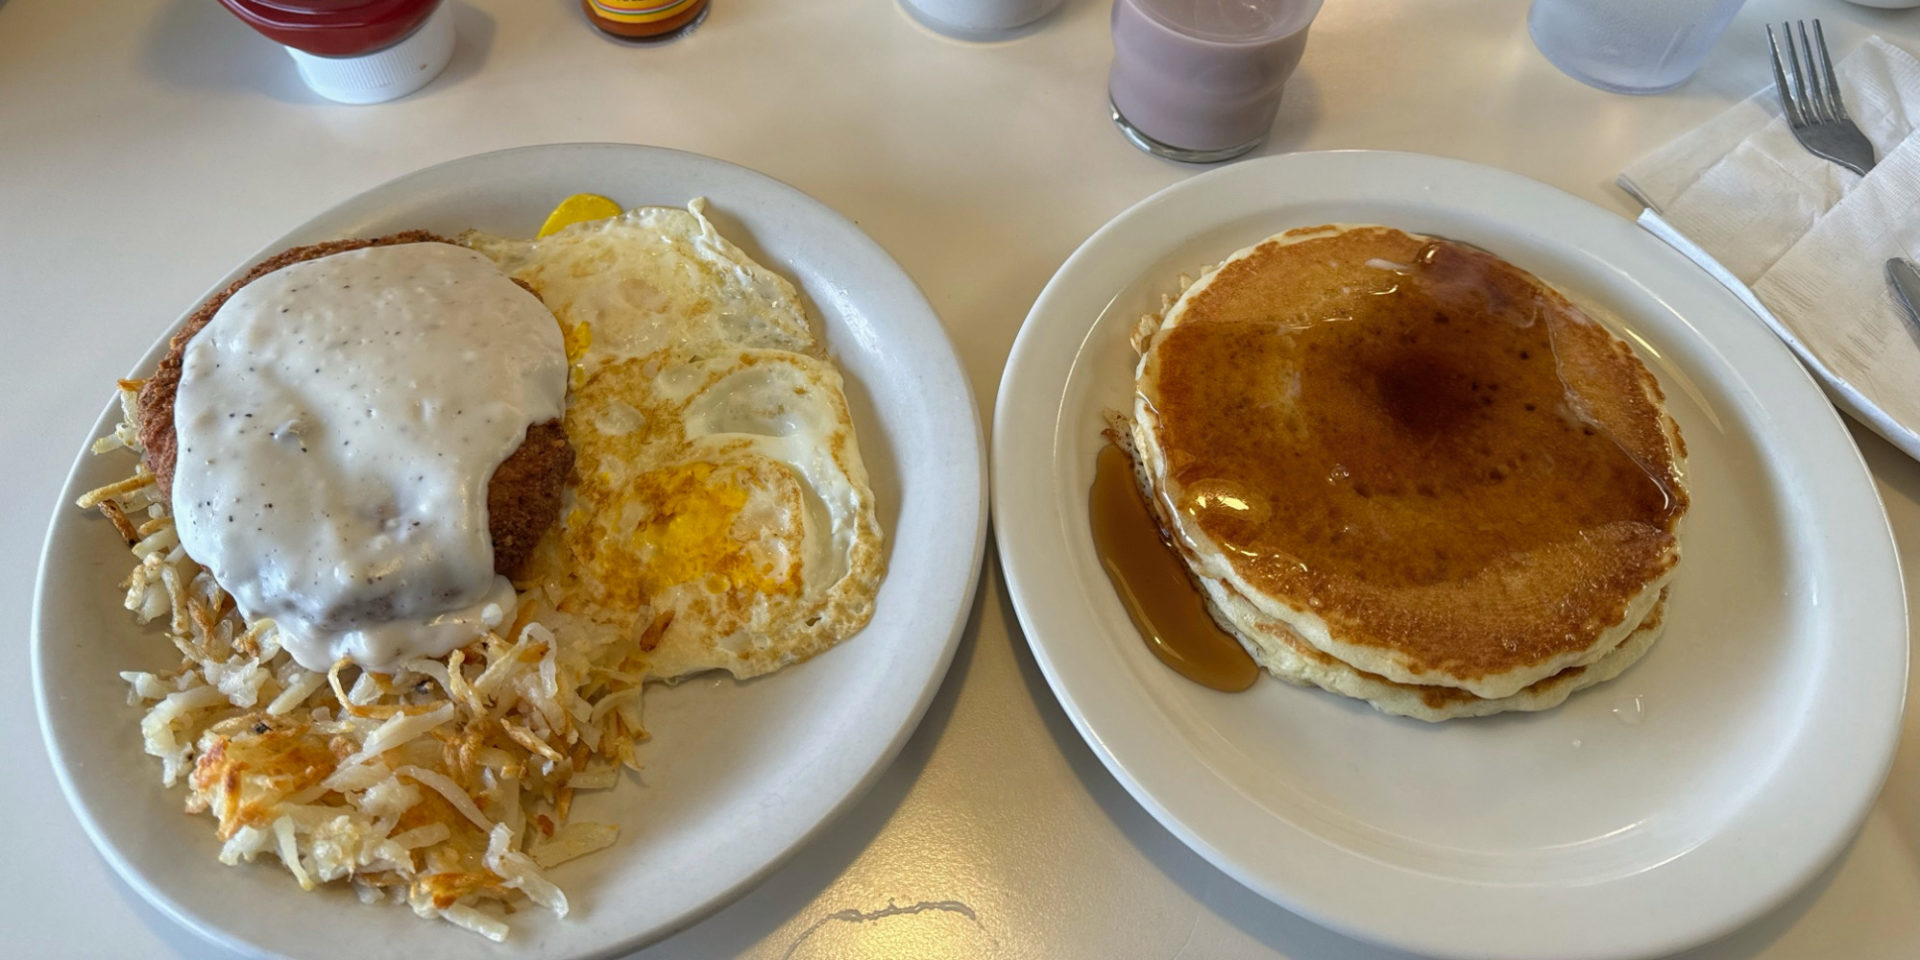 The author's breakfast at Merry Ann's Diner.